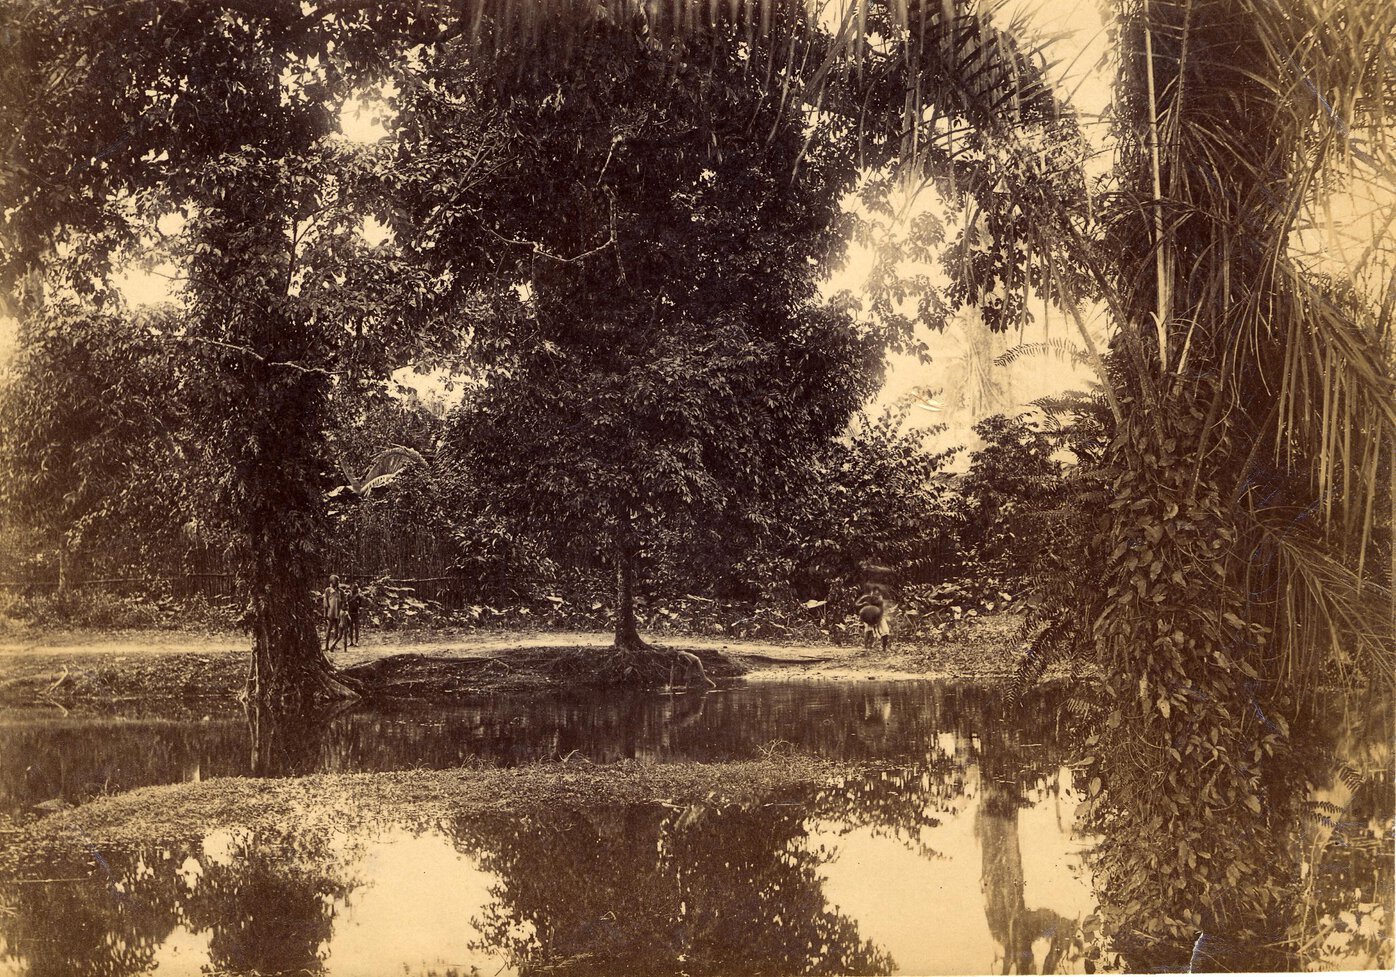 Forest scene: river in foreground, children and adult on path along river bank.